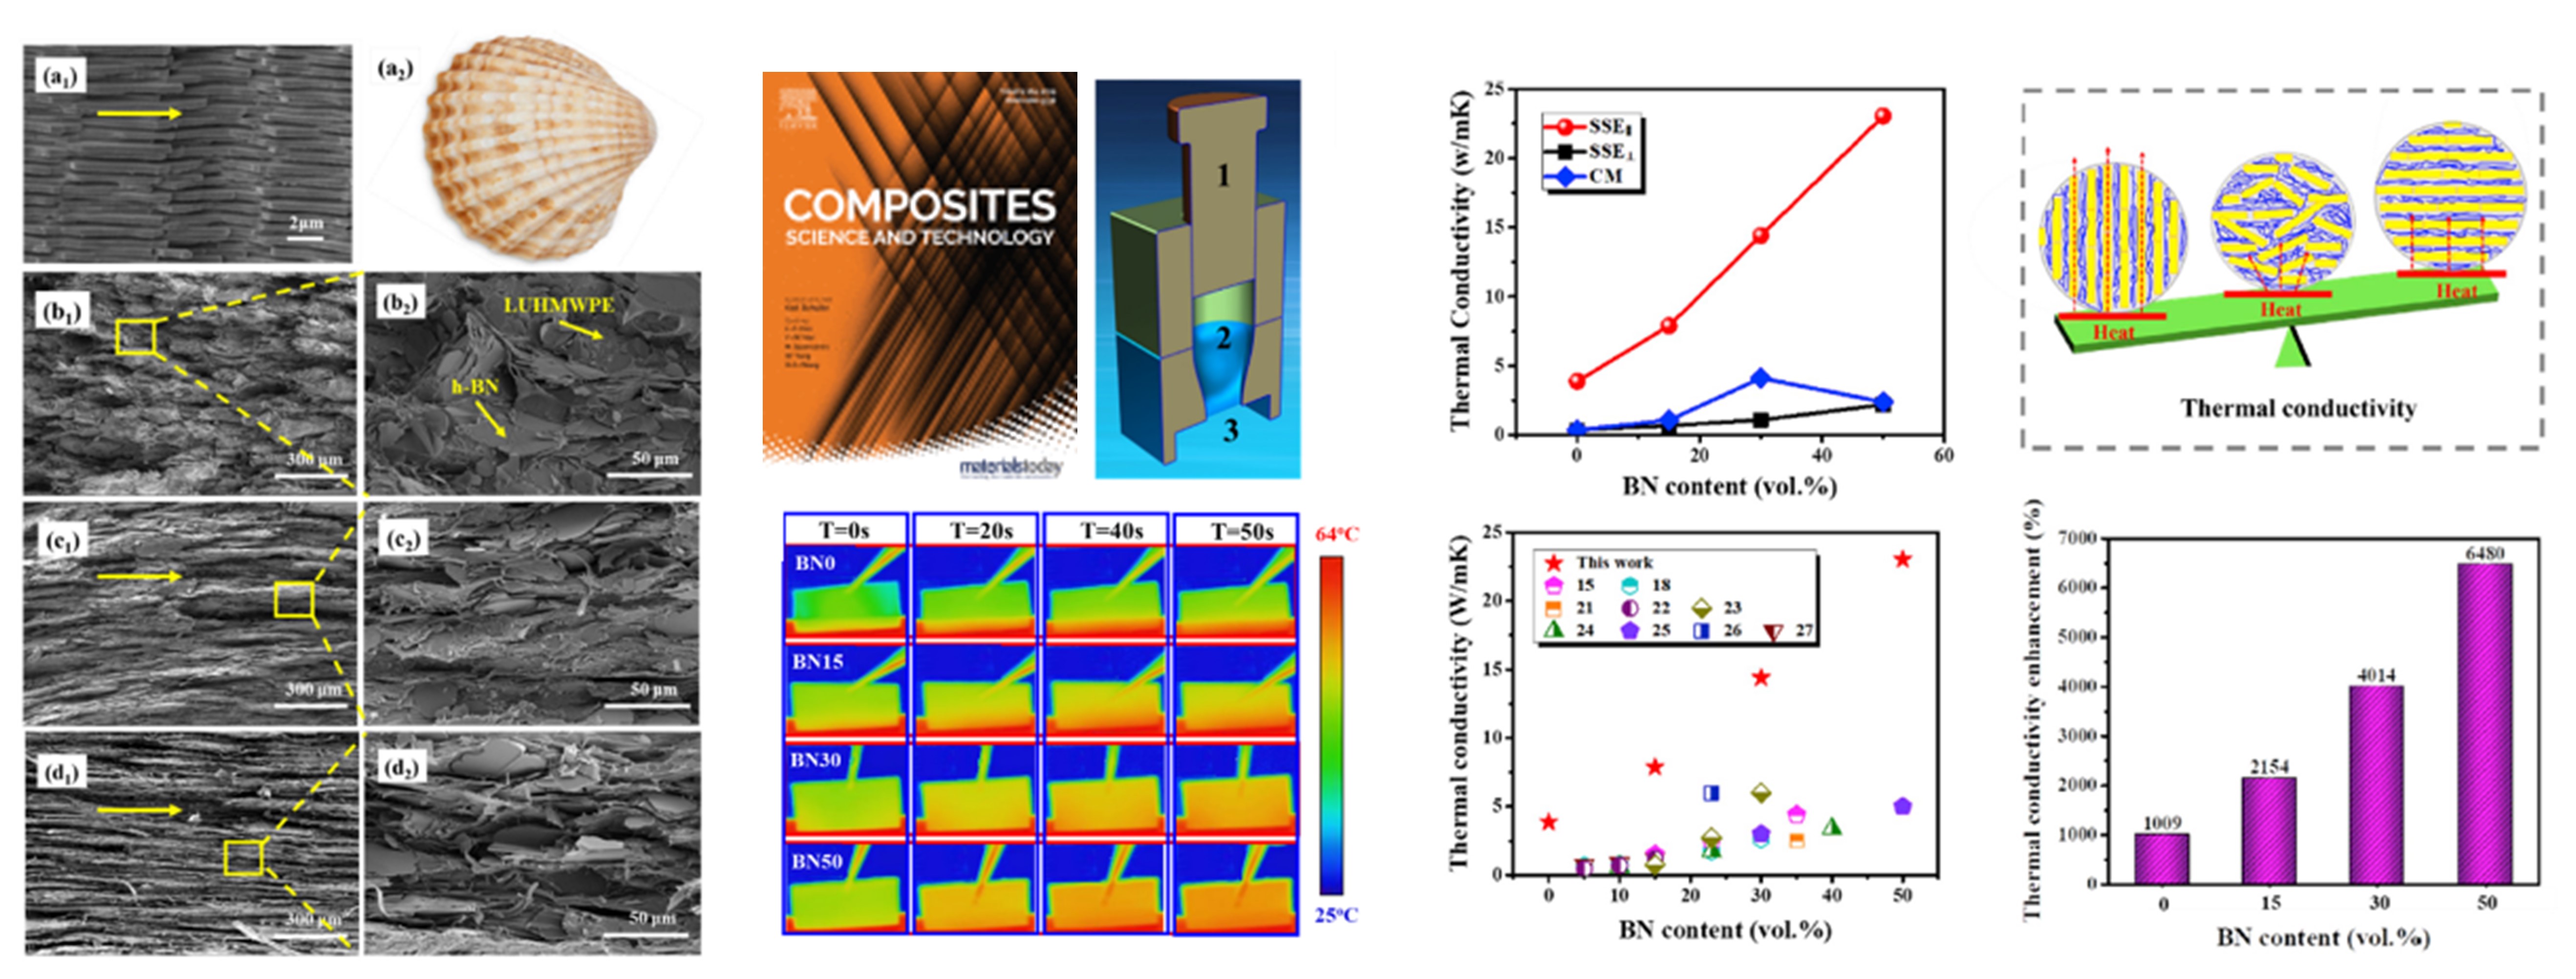 Highly thermally conductive and mechanically robust composite of linear ultrahigh molecular weight polyethylene and boron nitride via constructing nacre-like structure.